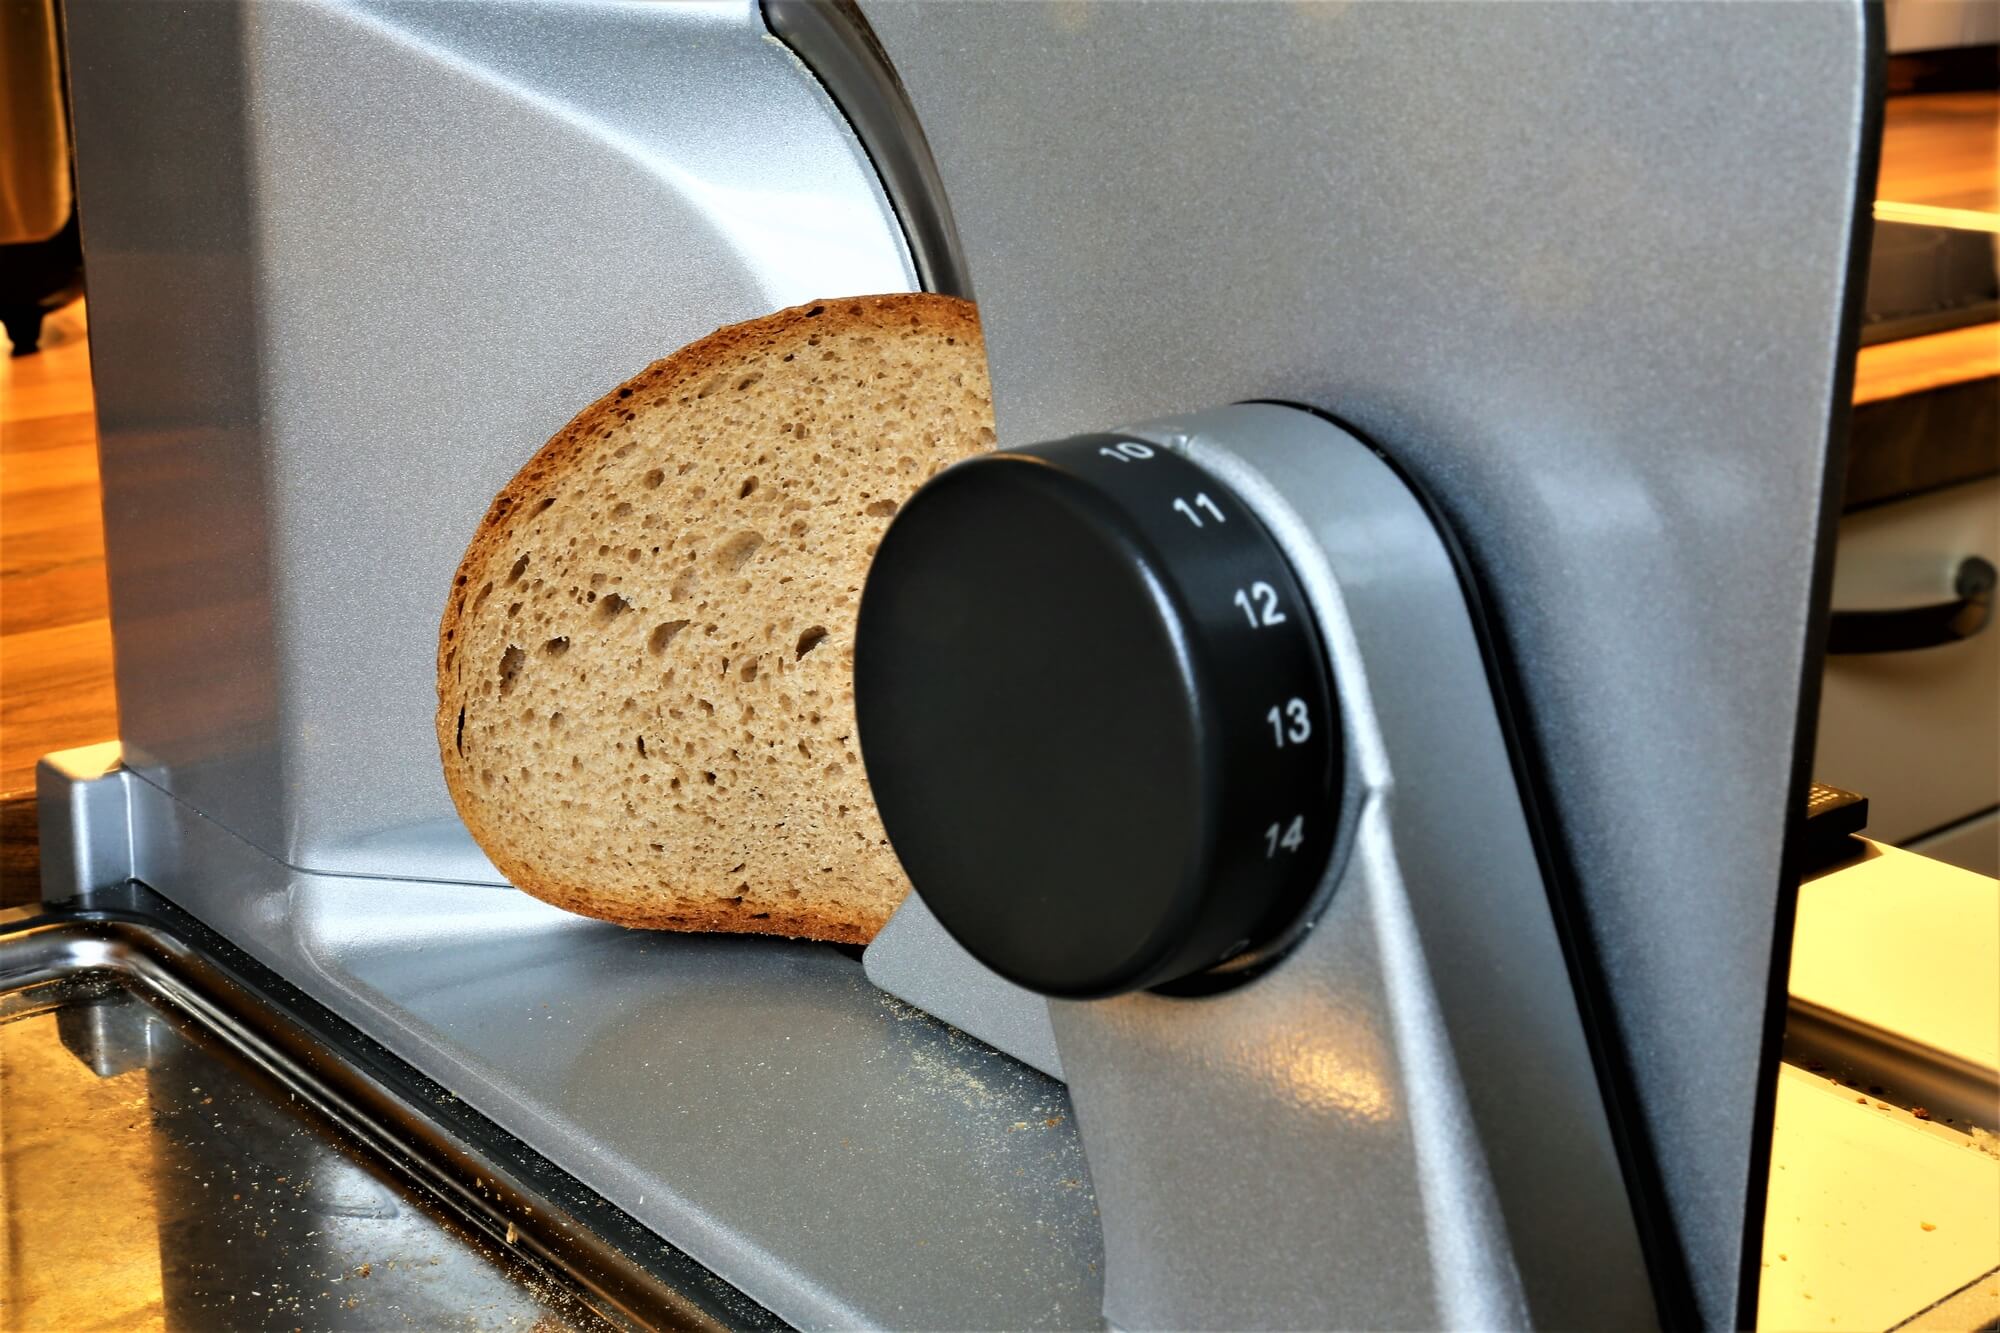 a photo of a bread slicer equipment with a sliced bread